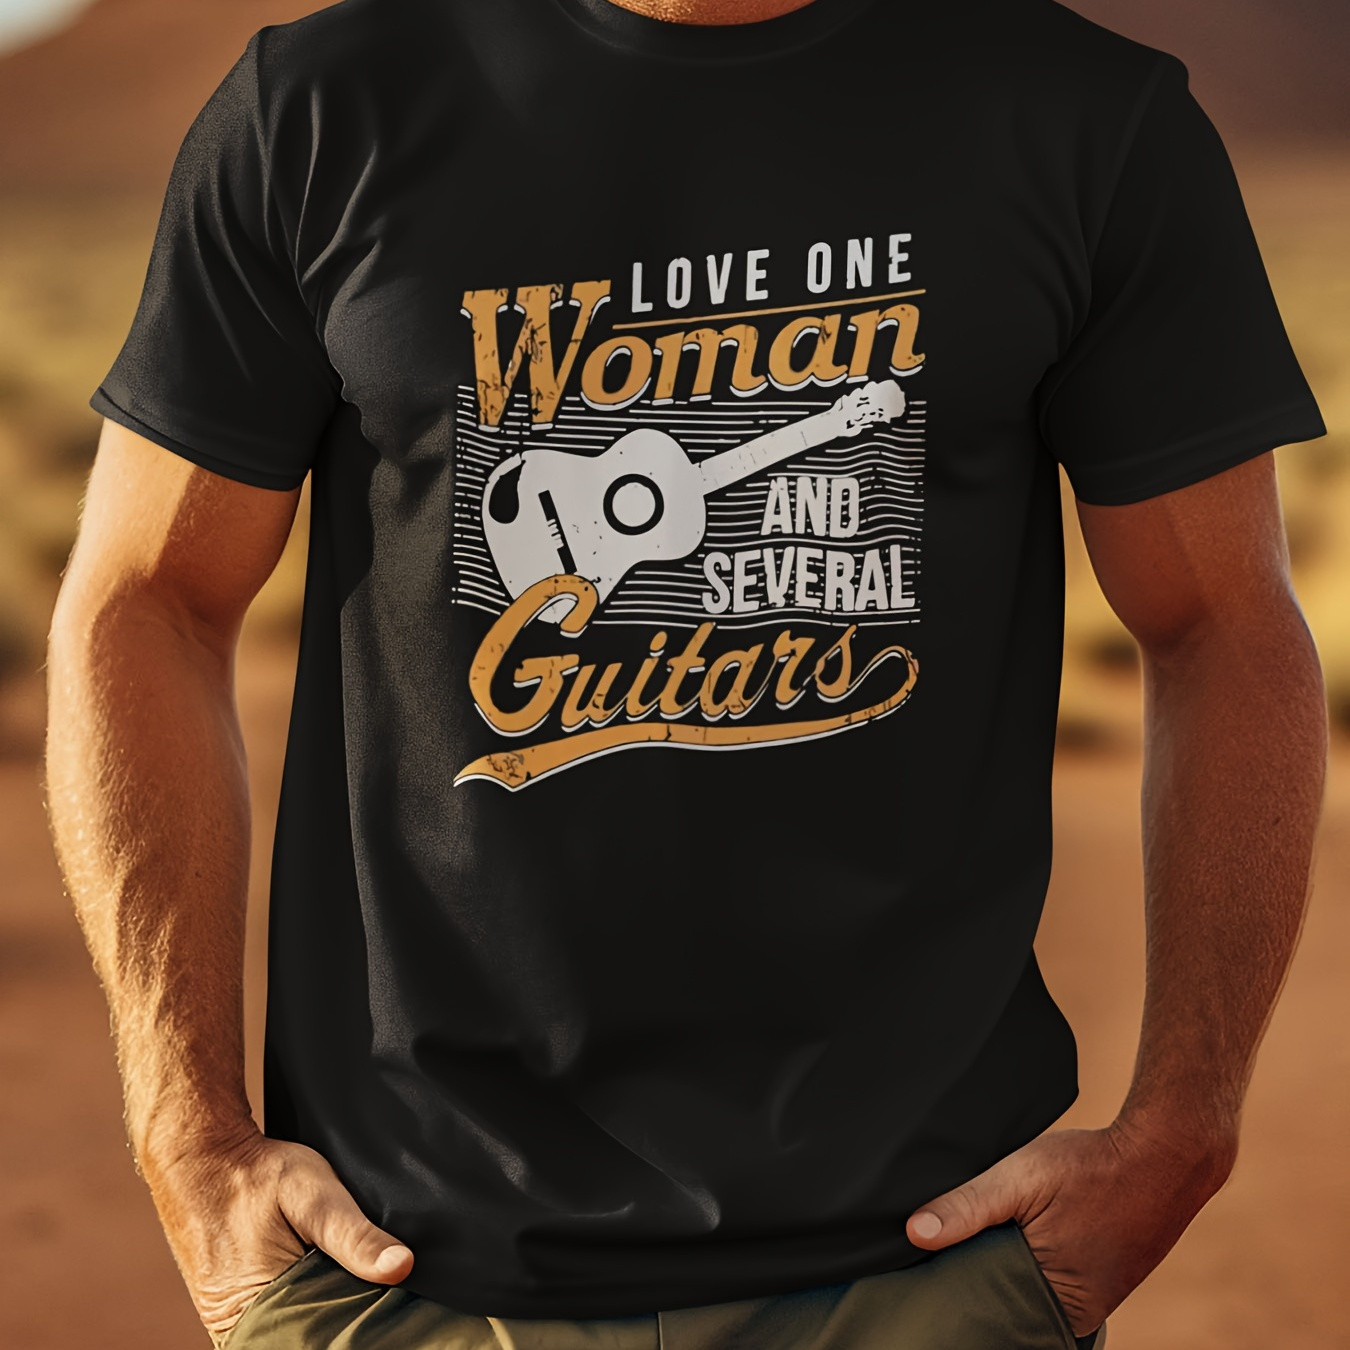 

'love 1 Woman And Several Guitars' - Summer Men's Cotton Front Printed Short-sleeved T-shirt - Comfortable & Breathable Novel Tops - Gift For A Man With A Story